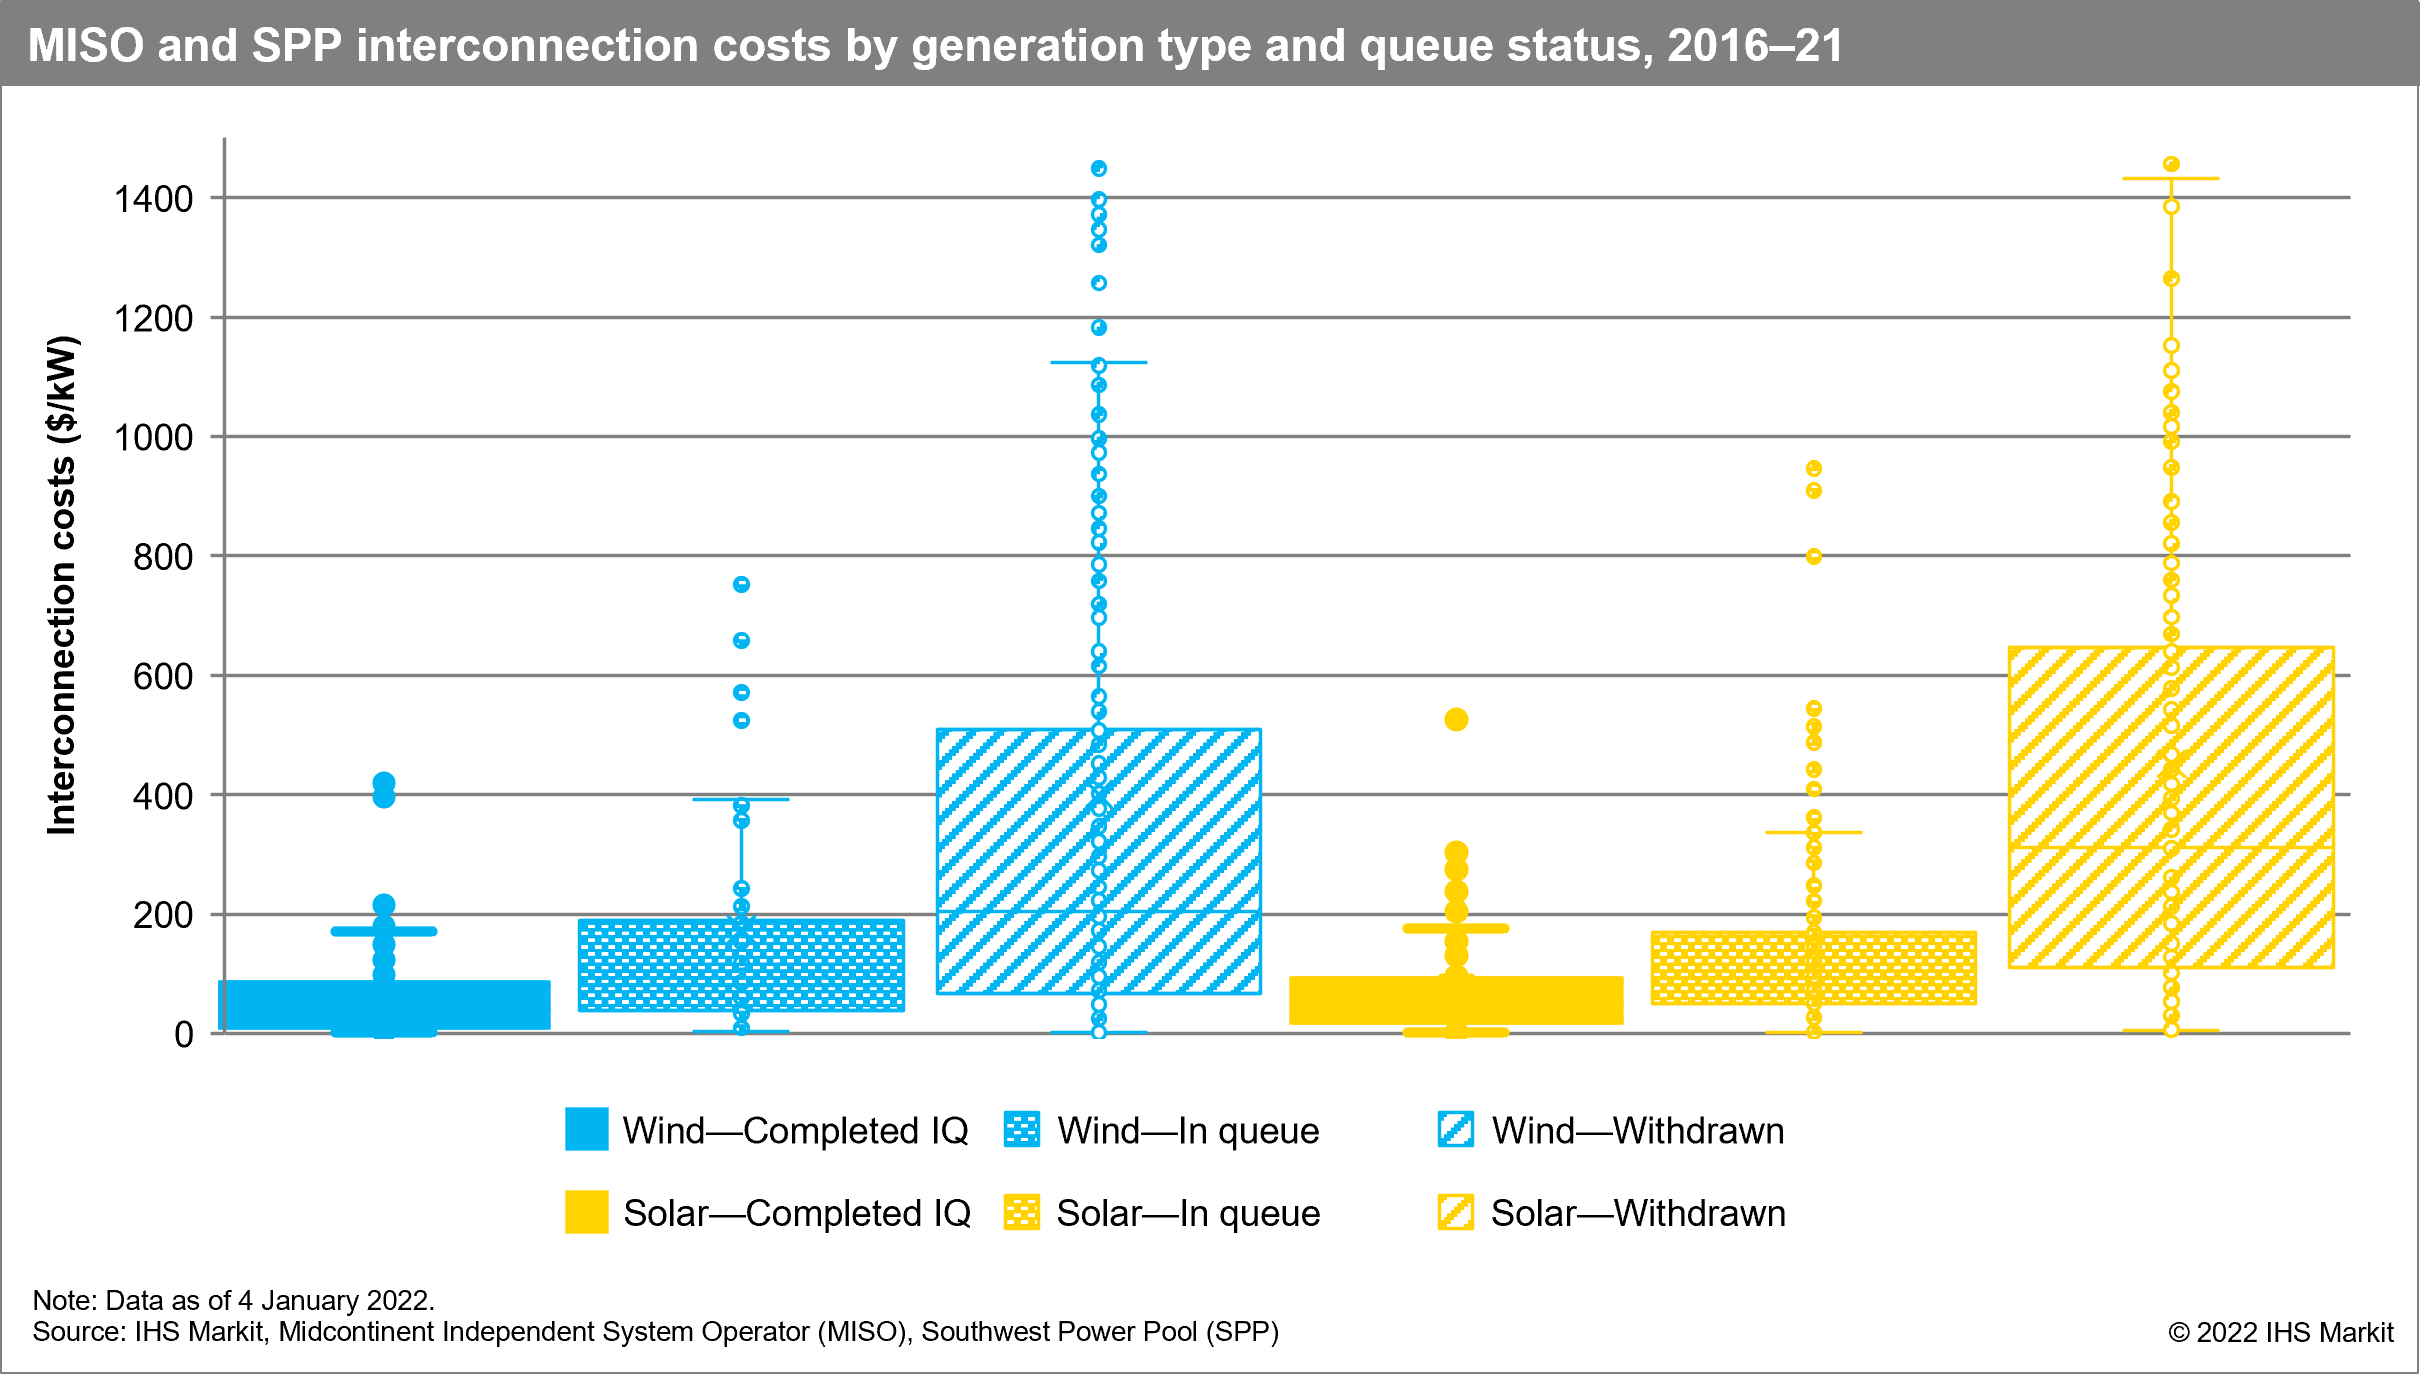 MISO and SPP interconnection costs by generation type and queue status, 2016-21